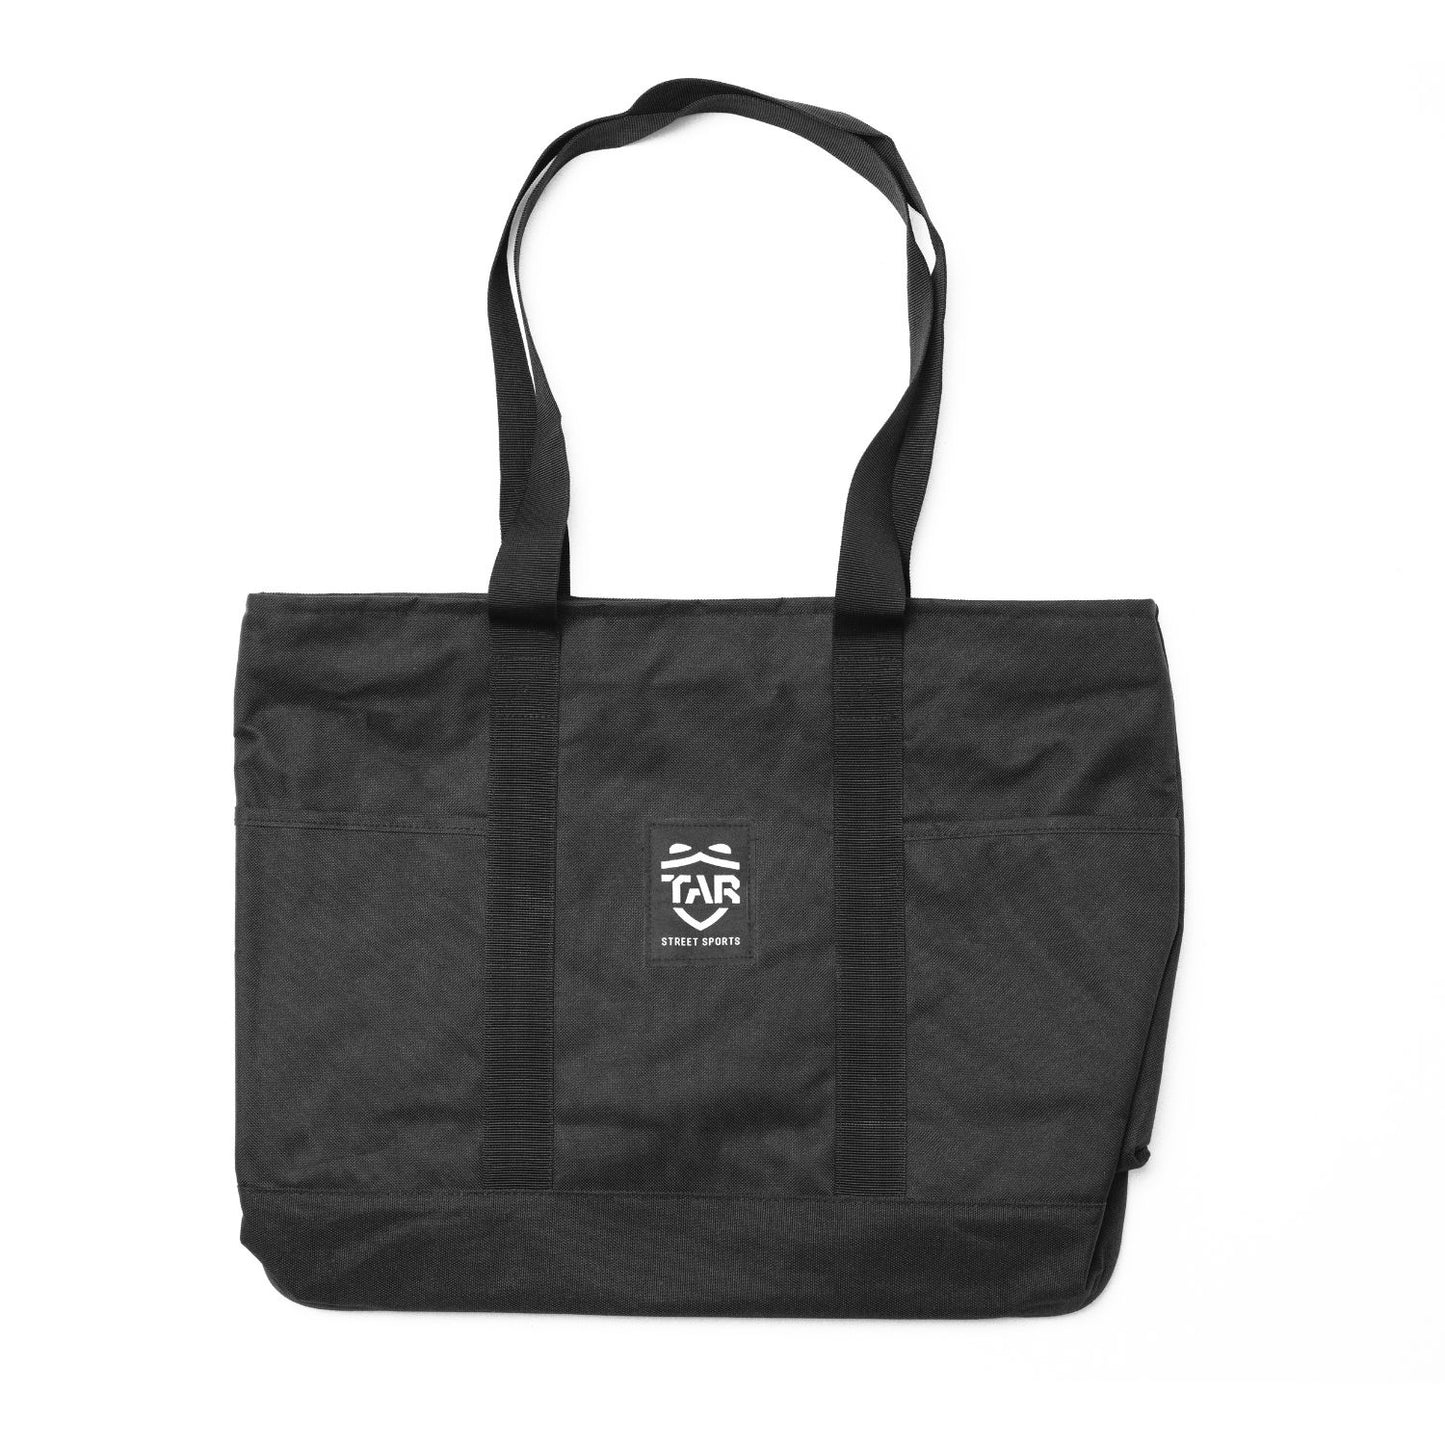 Super Heavy Duty Tote Bag (Fit 12+ Spray Cans)